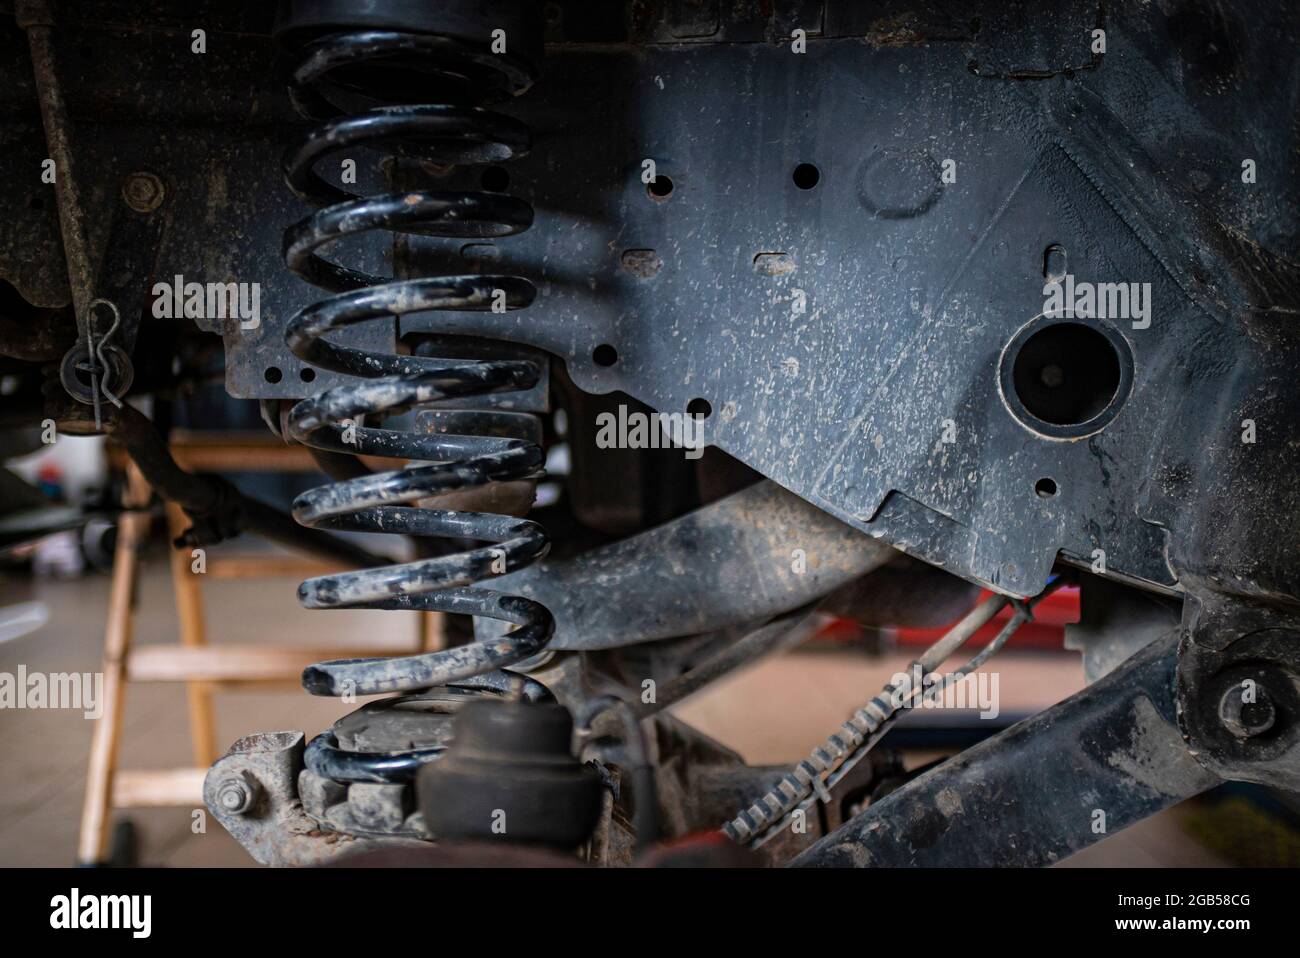 Suspension of the off road car ready for repair Stock Photo